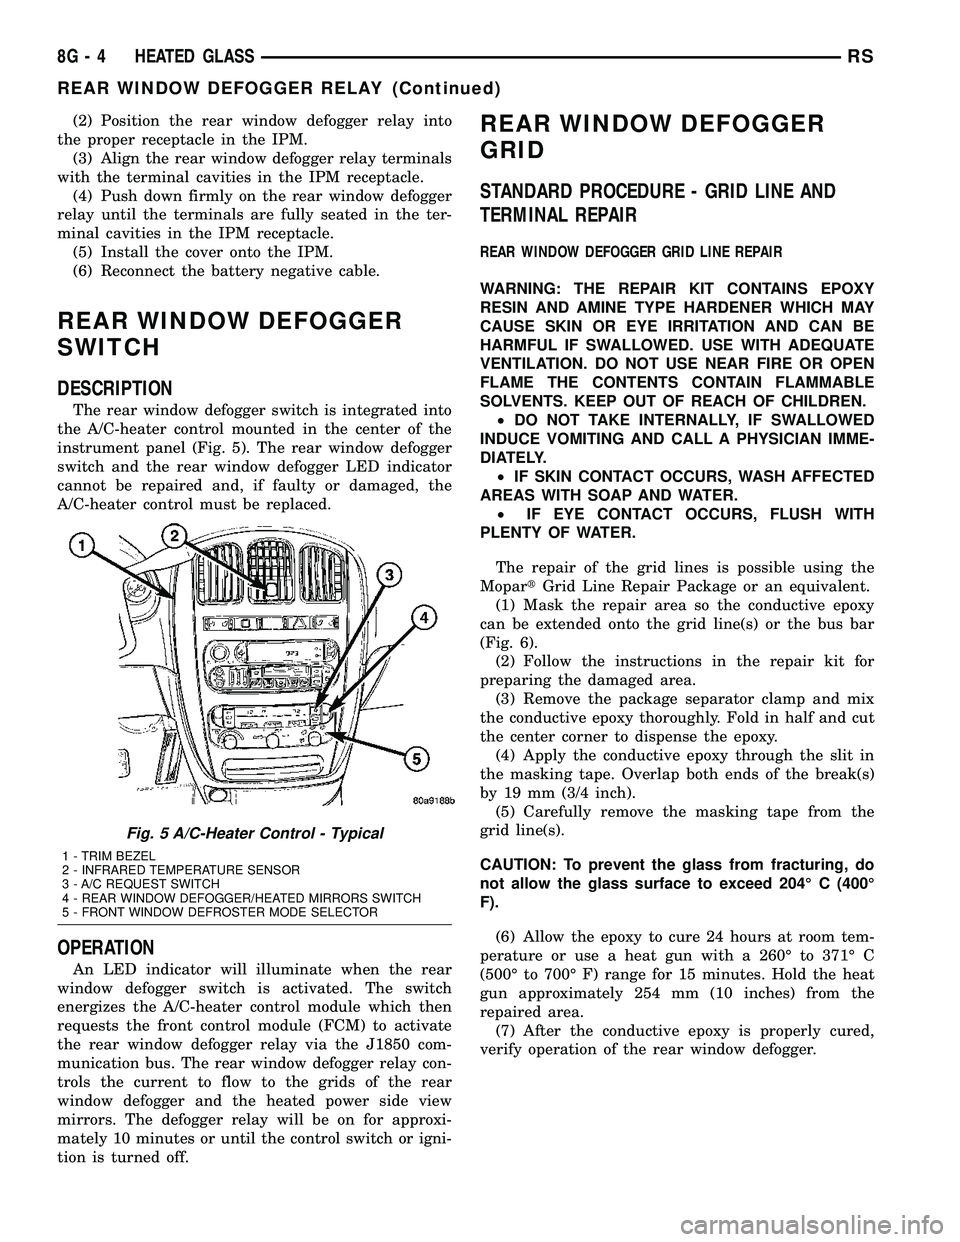 DODGE TOWN AND COUNTRY 2004  Service Manual (2) Position the rear window defogger relay into
the proper receptacle in the IPM.
(3) Align the rear window defogger relay terminals
with the terminal cavities in the IPM receptacle.
(4) Push down fi